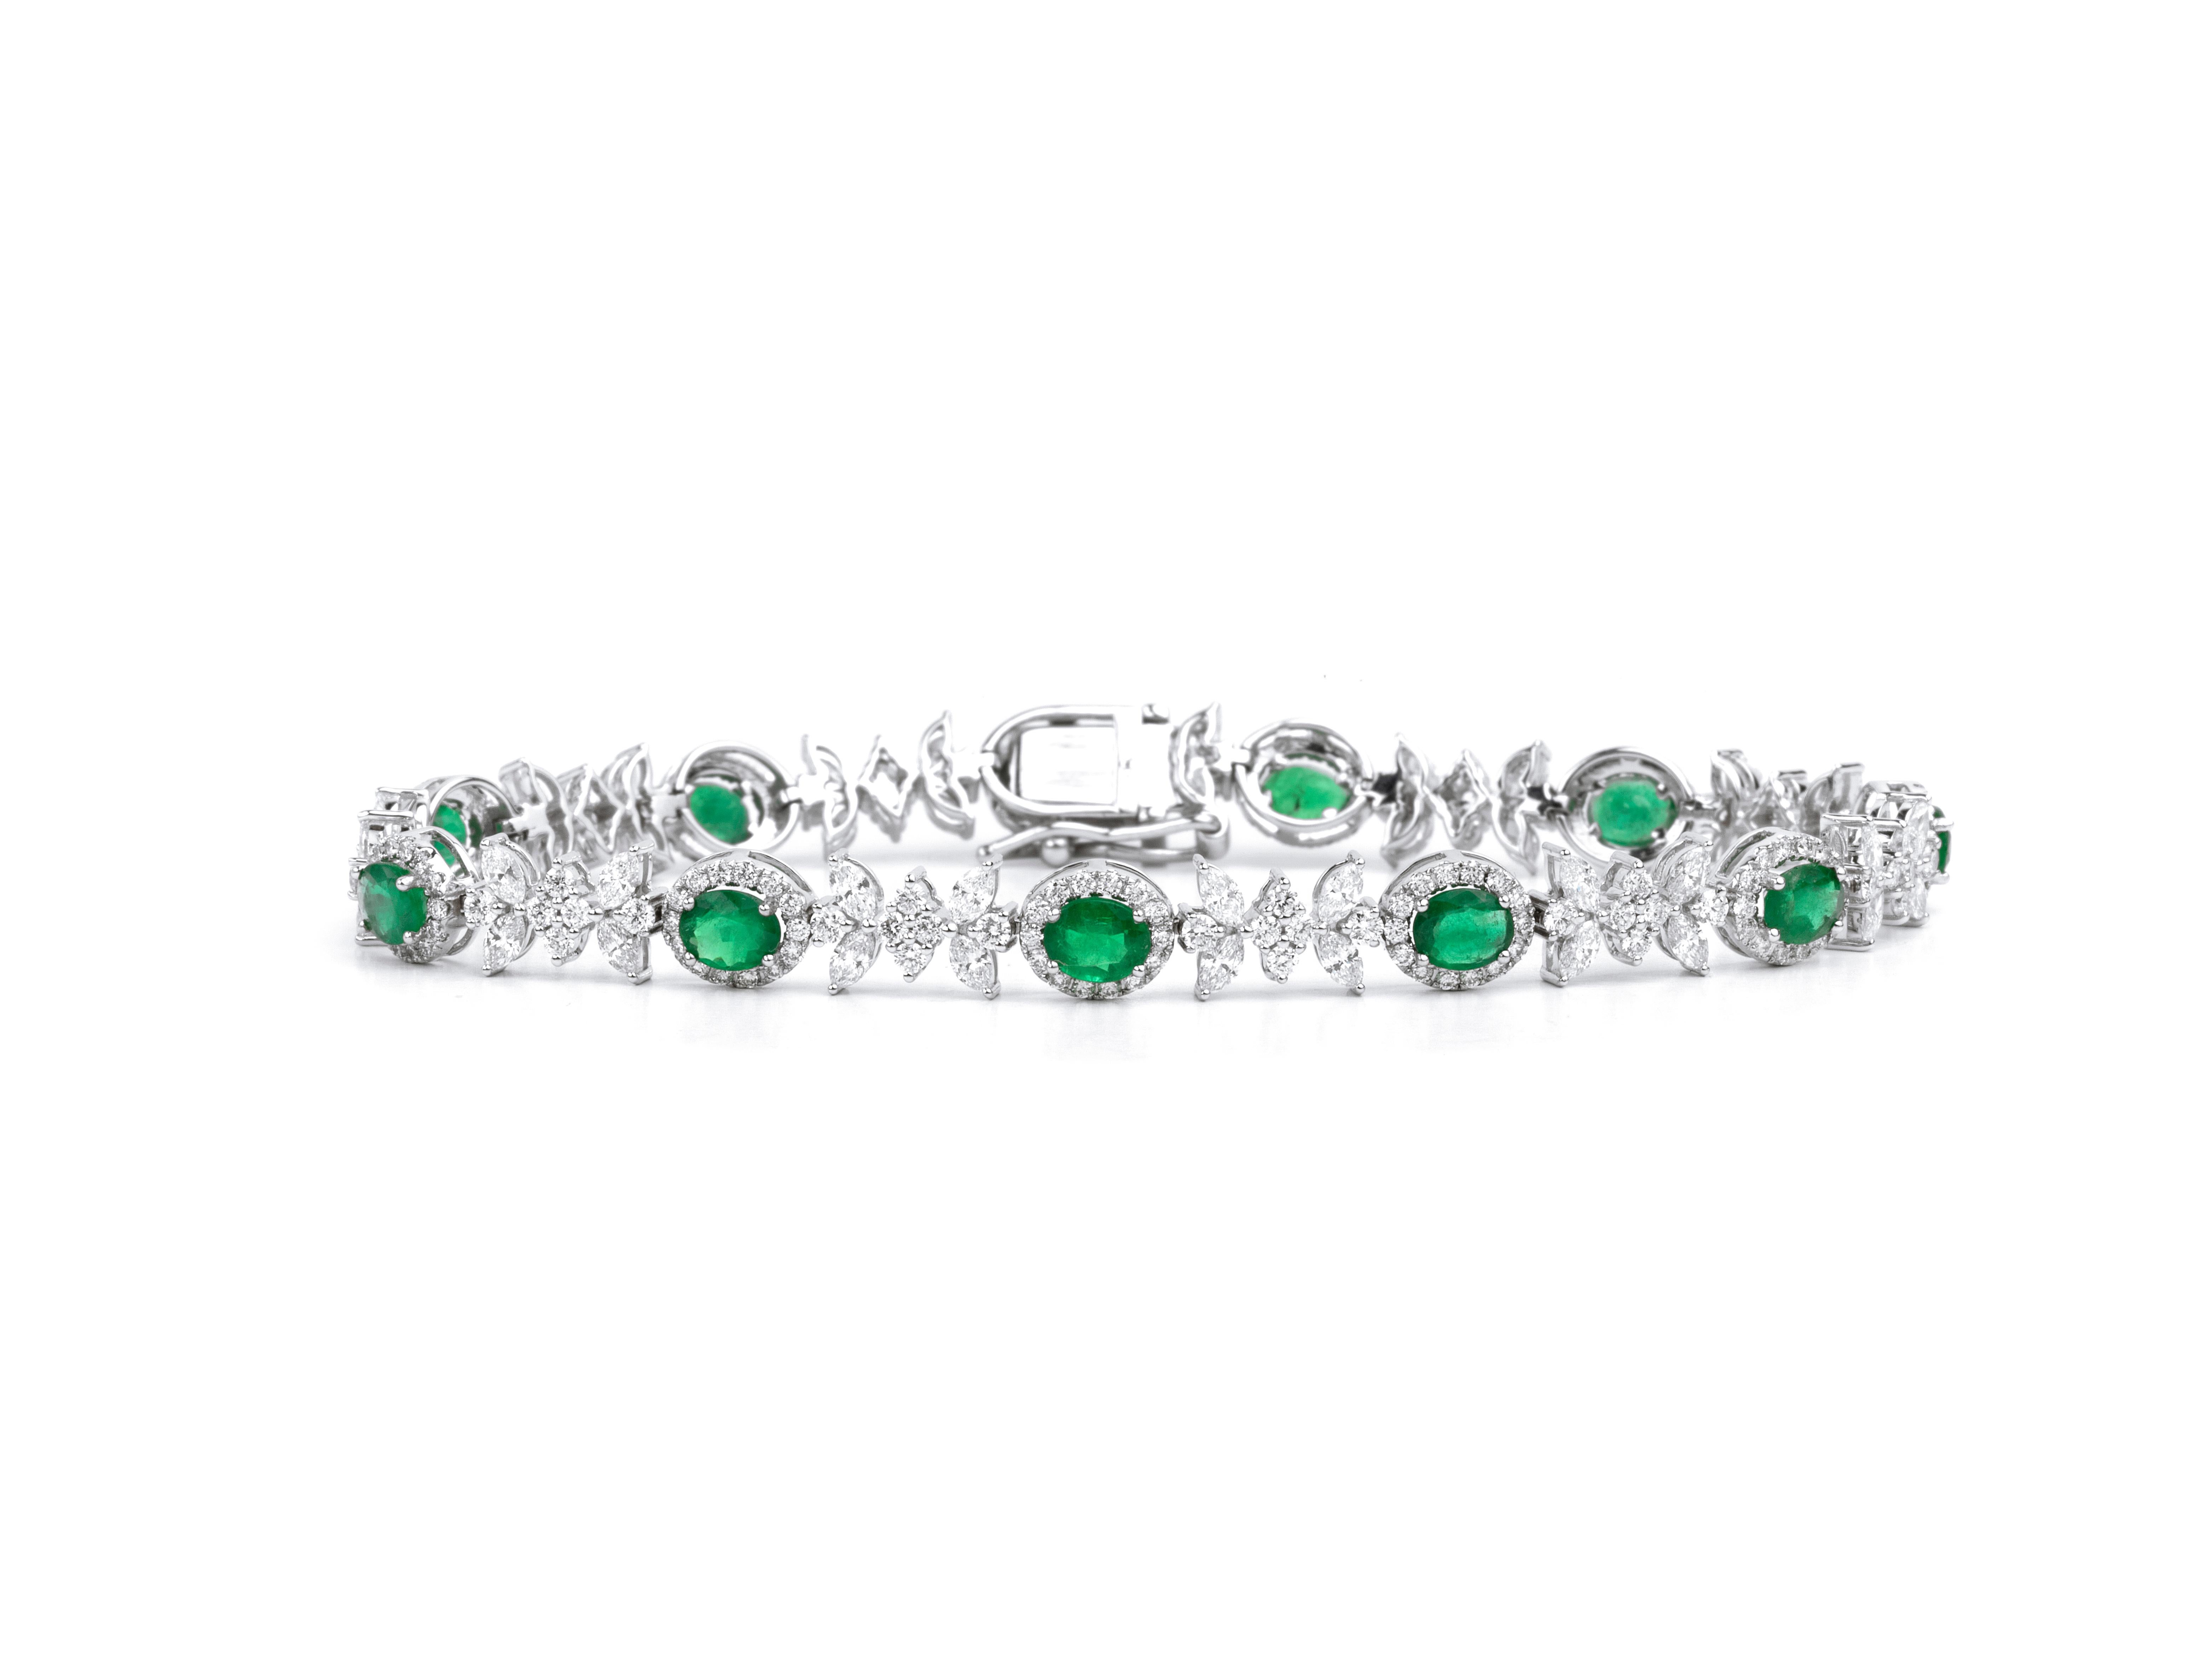 Exceptional 4.5 Ct Oval Cut Natural Emerald Bracelet with diamond 18k White Gold In New Condition For Sale In Jaipur, RJ